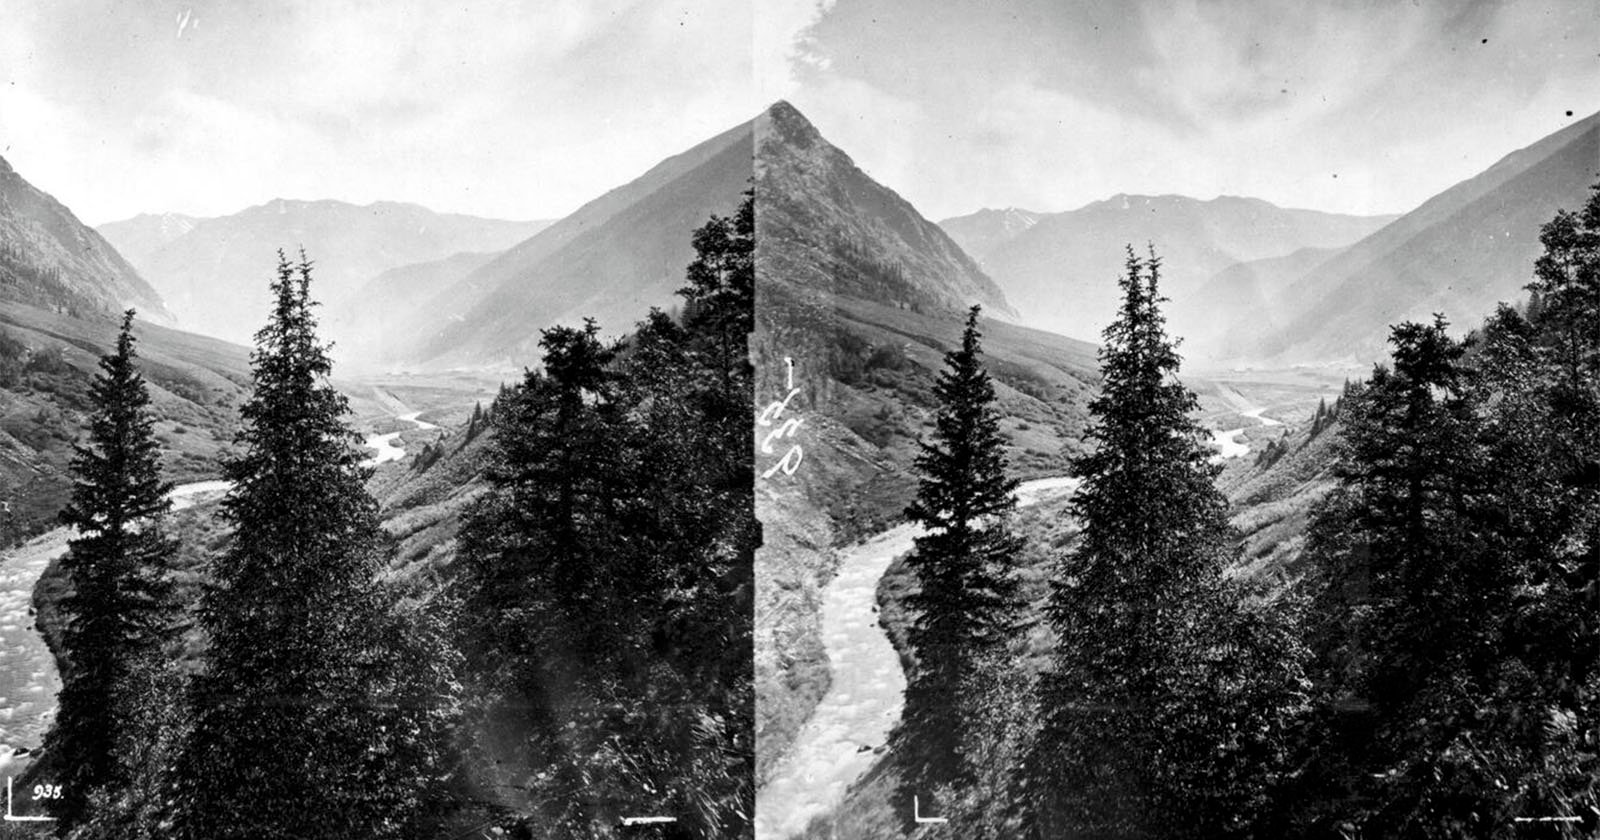 These Animated Stereograms Bring 19th Century Photos to Life